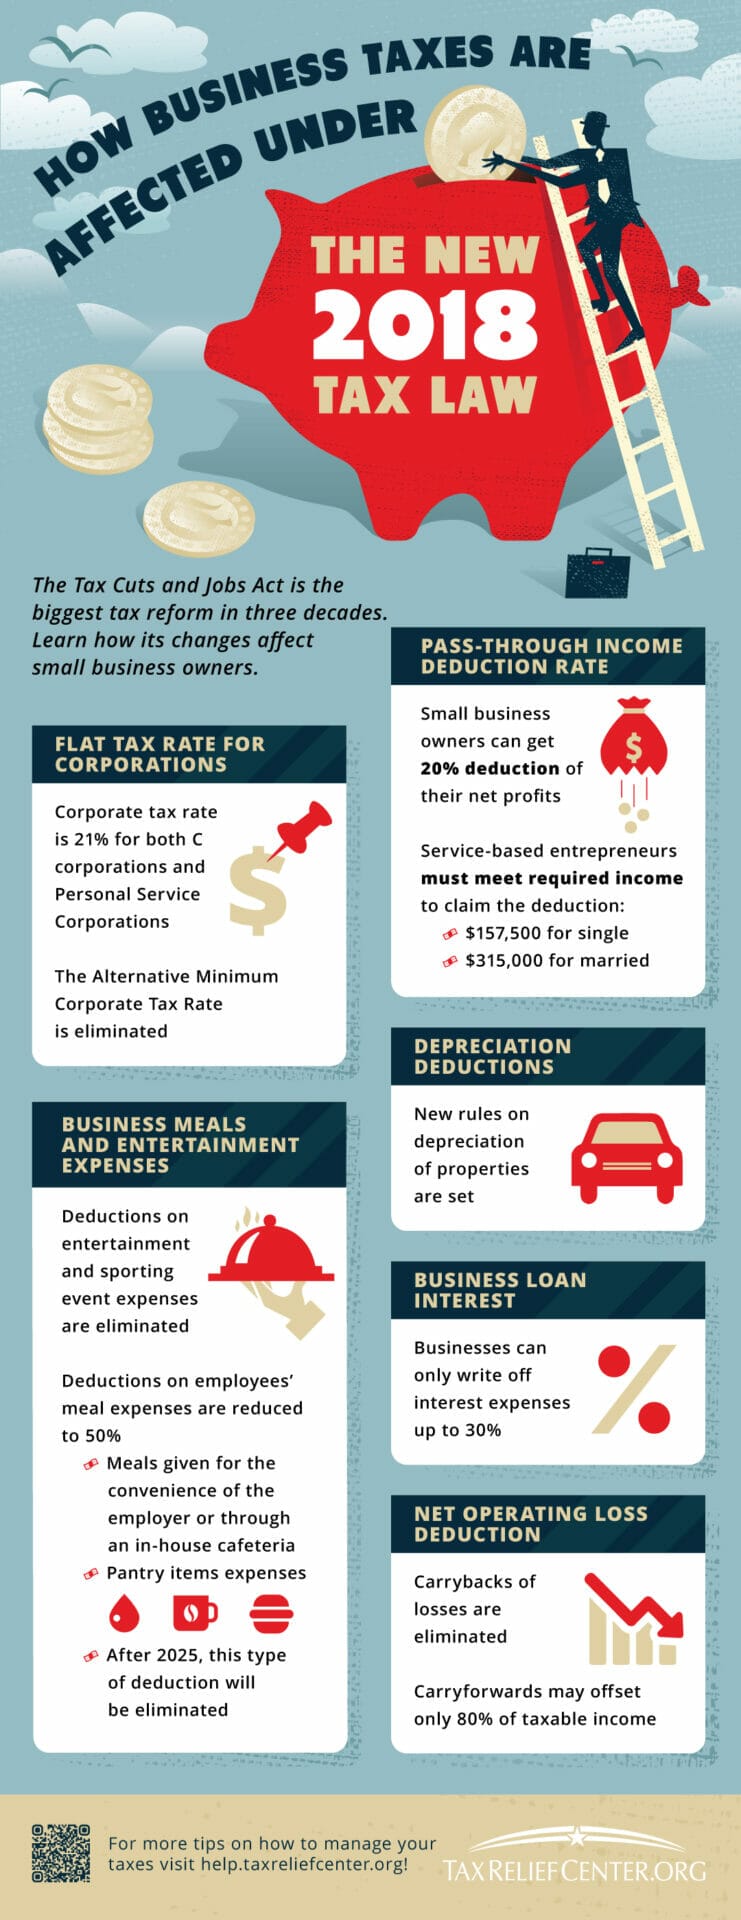 infographic | How Business Taxes Are Affected Under New 2018 Tax Law